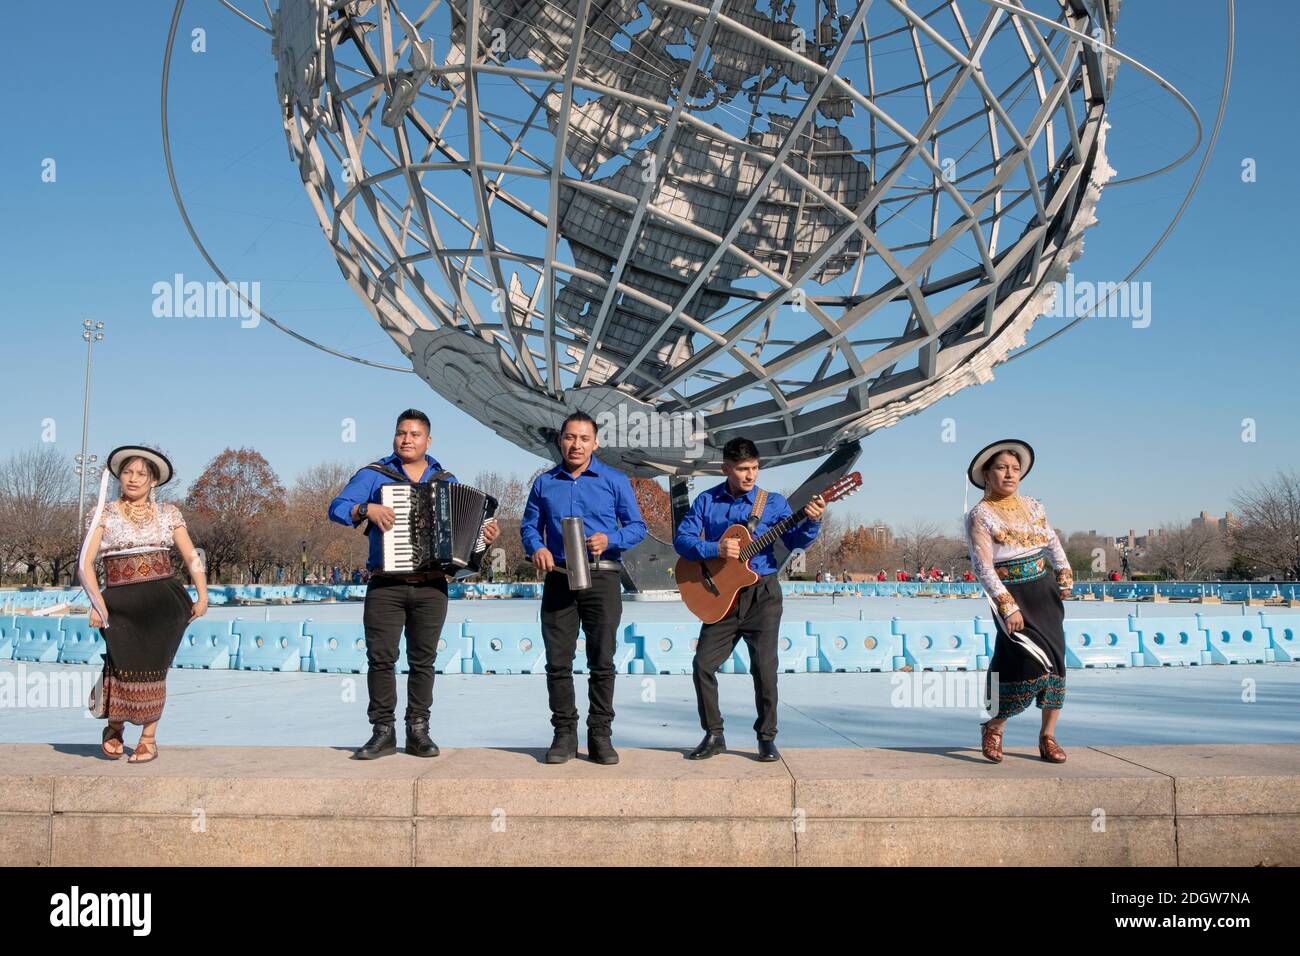 Ecuadorian musicians and dancers perform during the making of a video. At the Unisphere in Flushing Meadows, Corona Park in Queens, New York City. Stock Photo